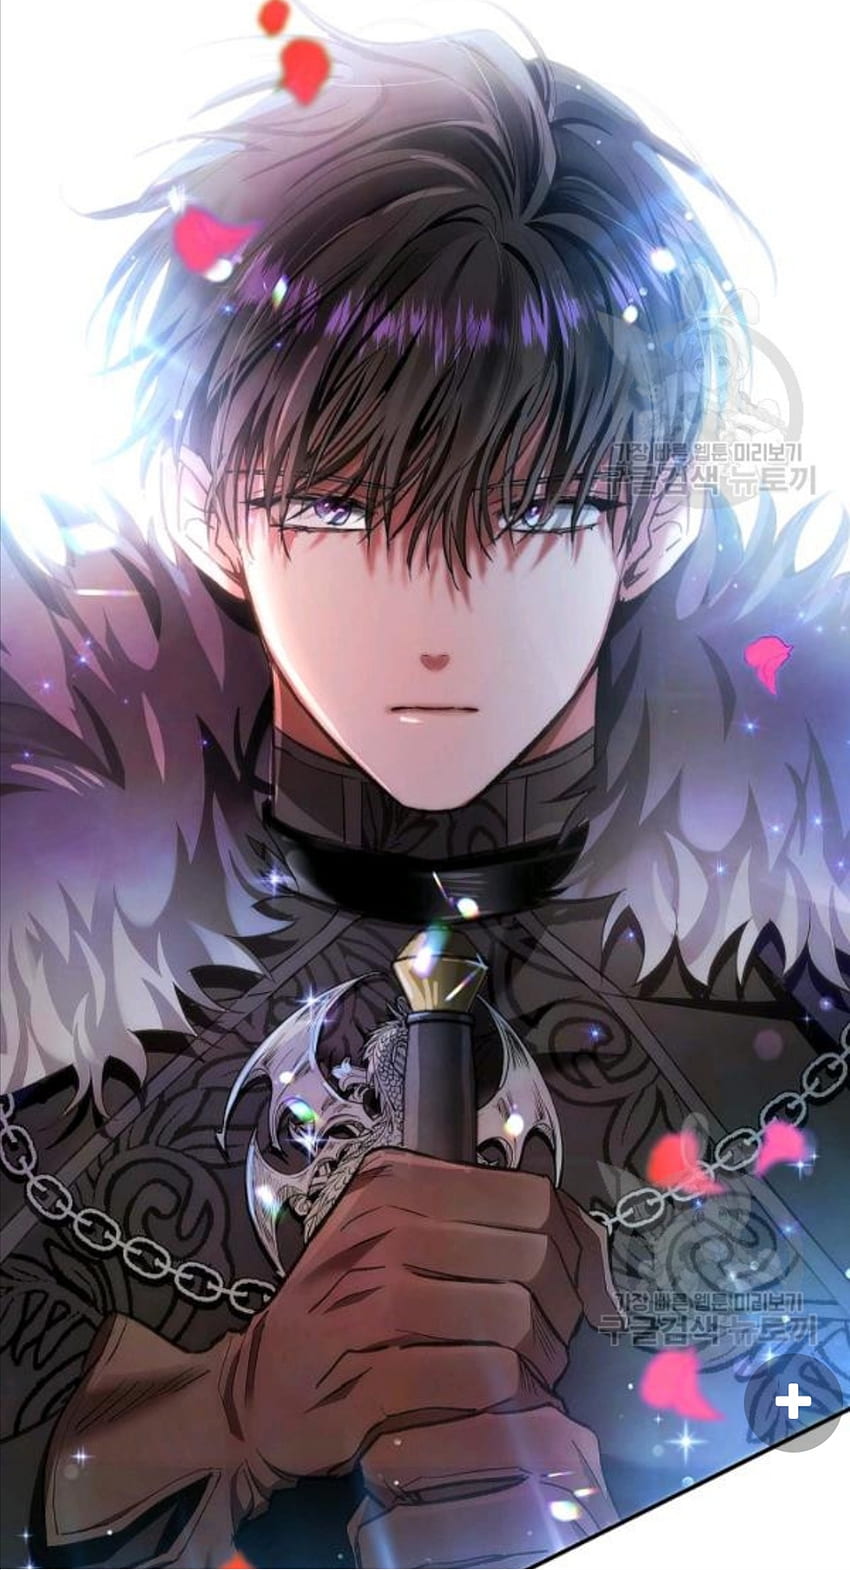 341898 Solo Leveling Manhwa Anime Sung Jin Woo Shadow Soldiers 4k   Rare Gallery HD Wallpapers